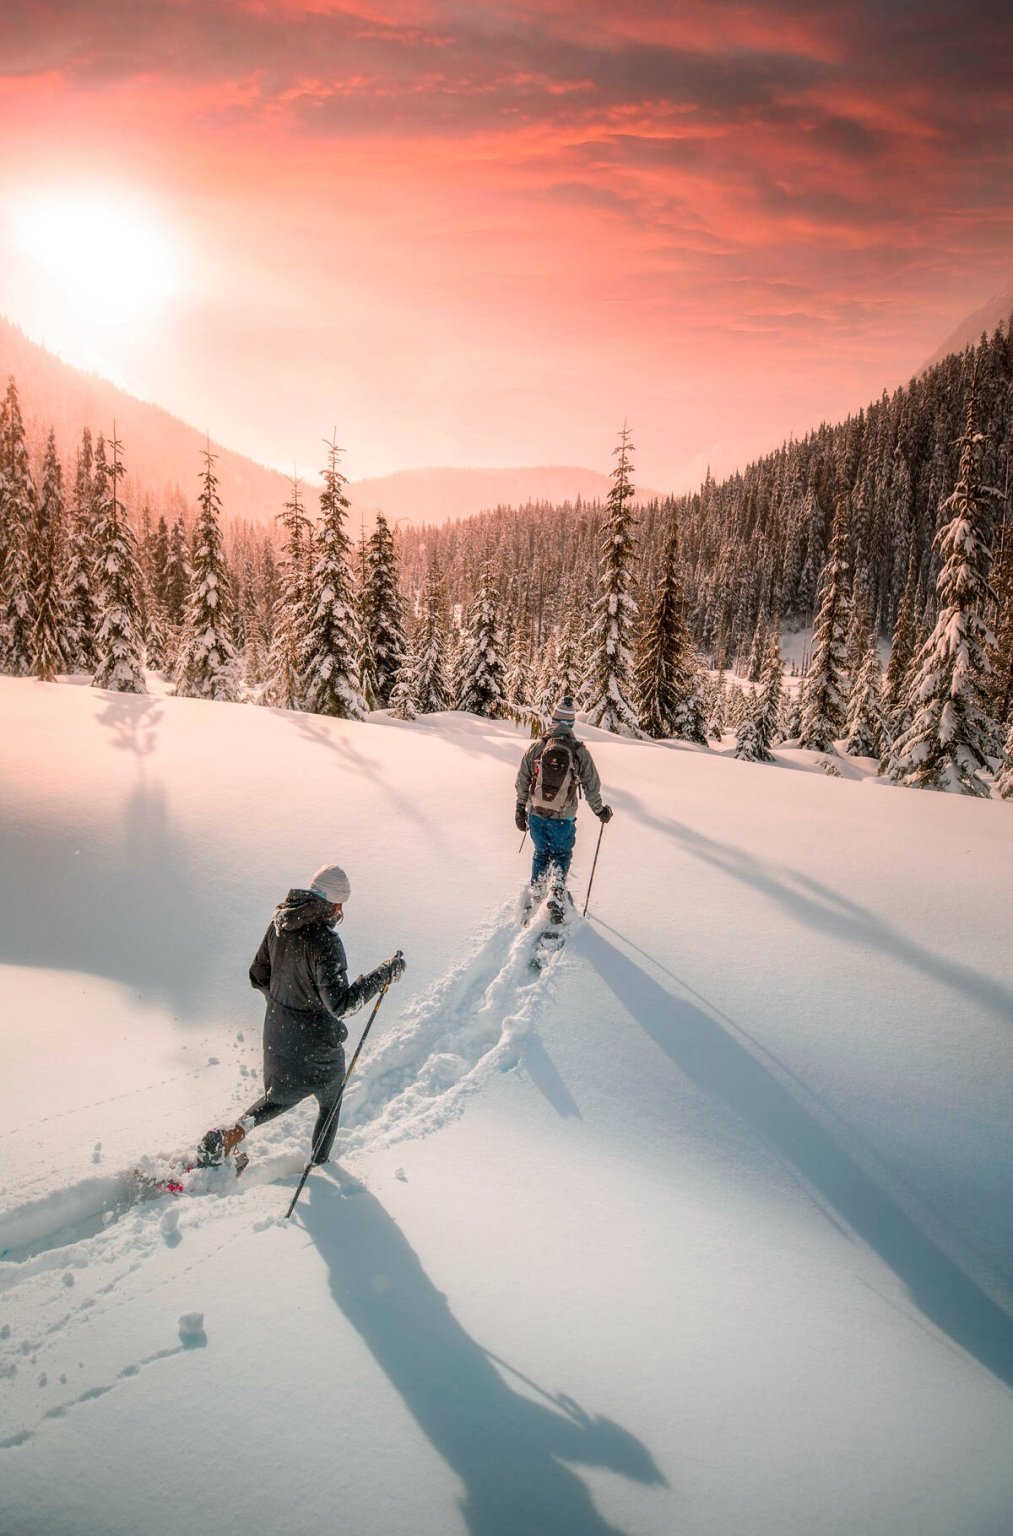 Two people snowshoe across a snow-covered opening in the alpine at dusk. Trees and distant mountains appear in the backgound.